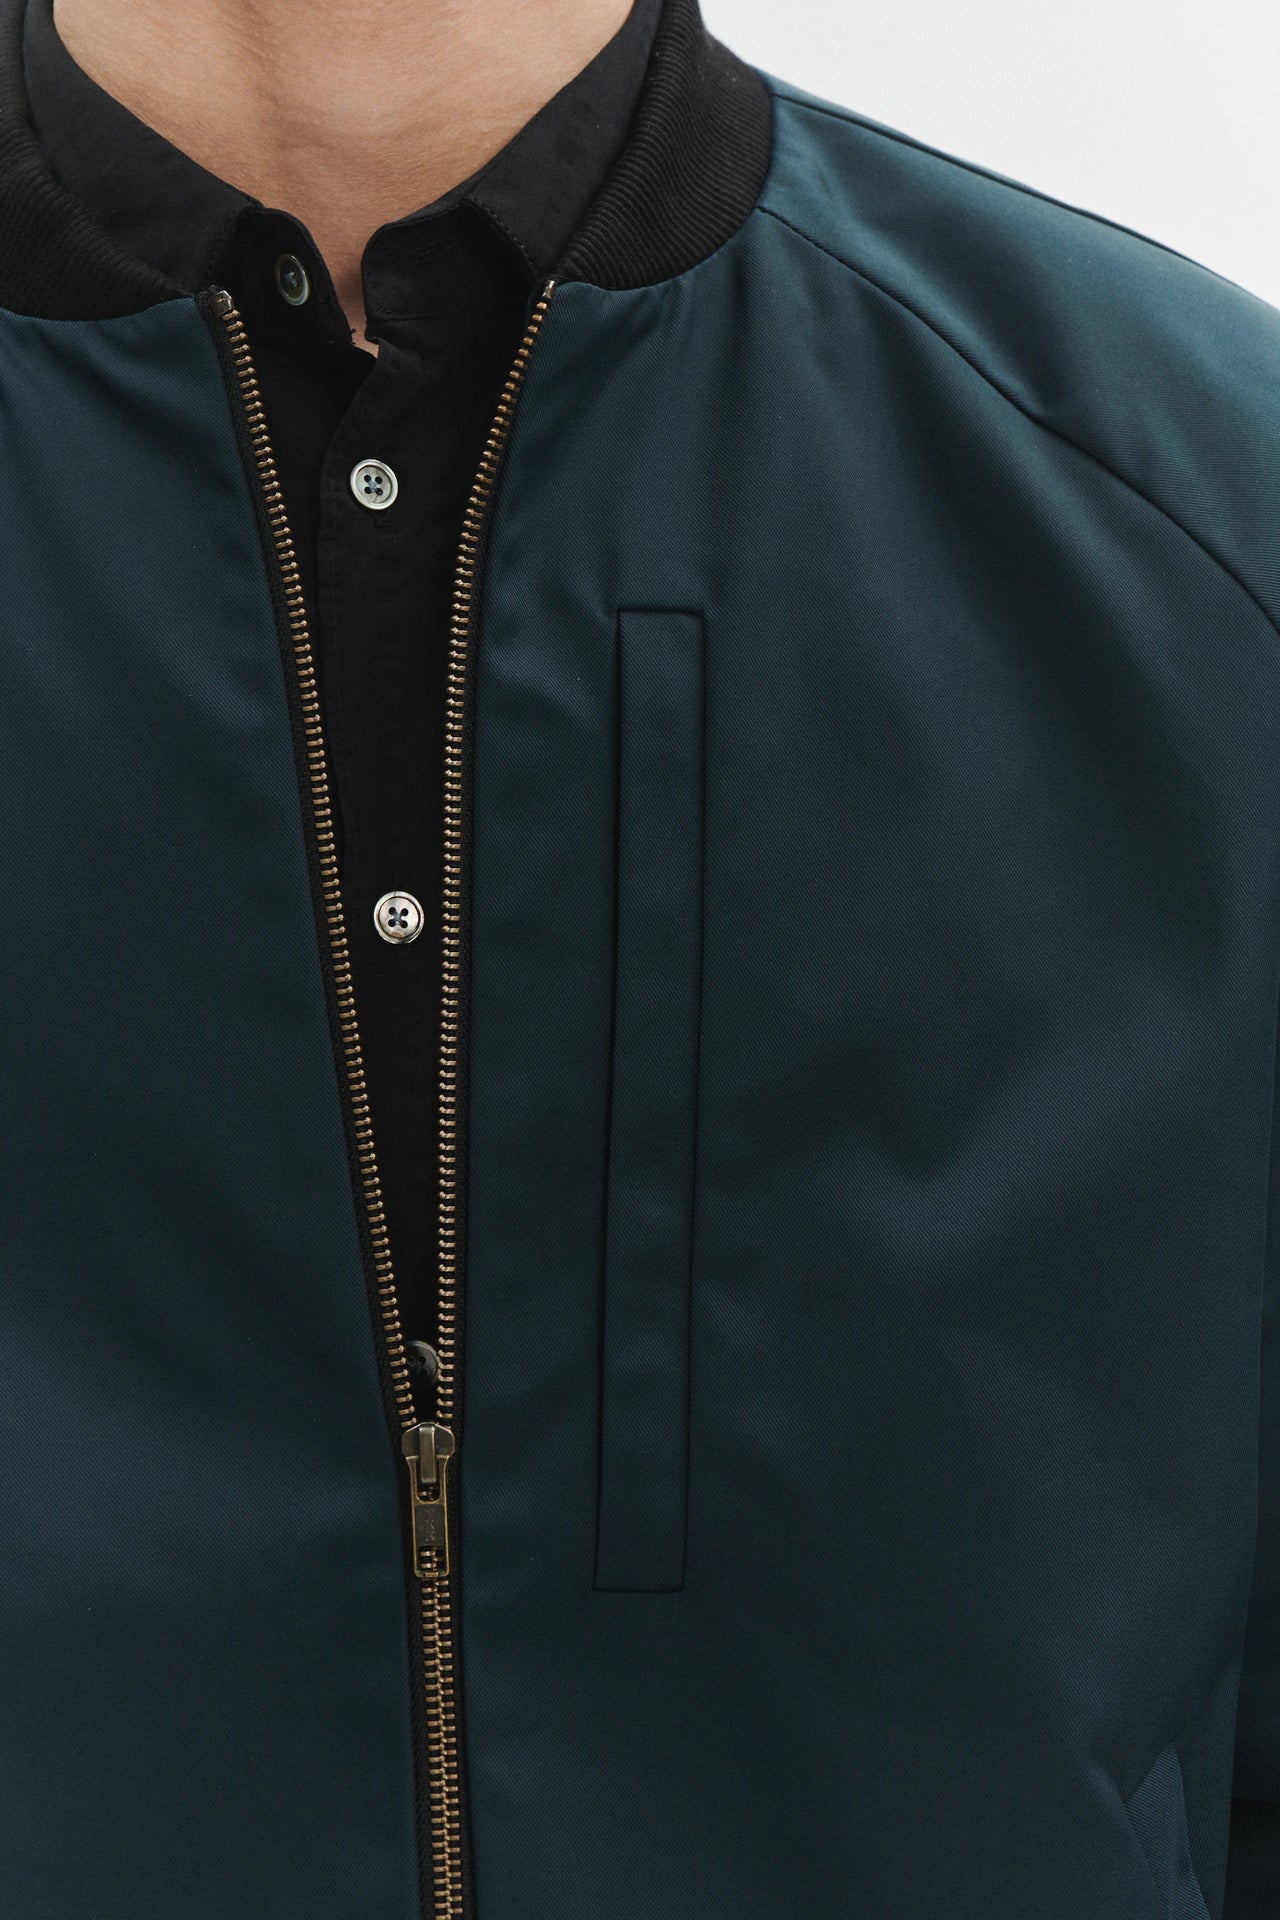 Petrol Blue Bomber Jacket in a High End Italian Wind Proof Technical Fabric